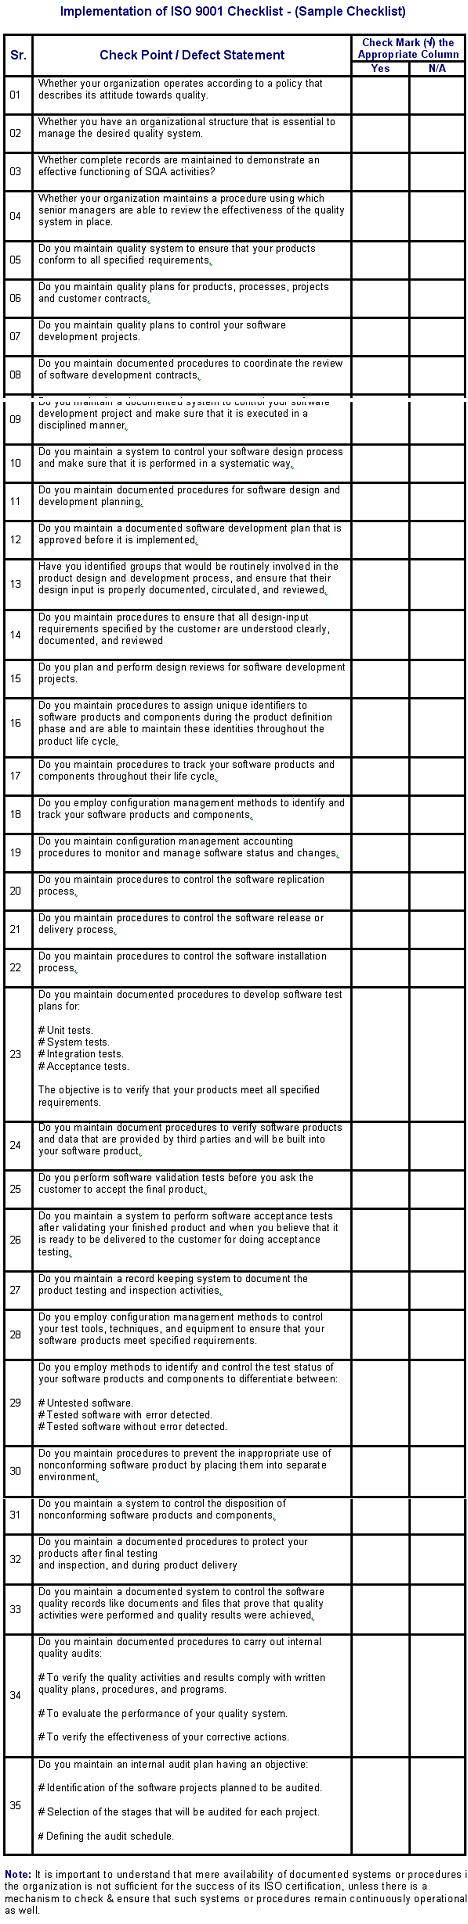 ISO 9001 Implementation Checklist 